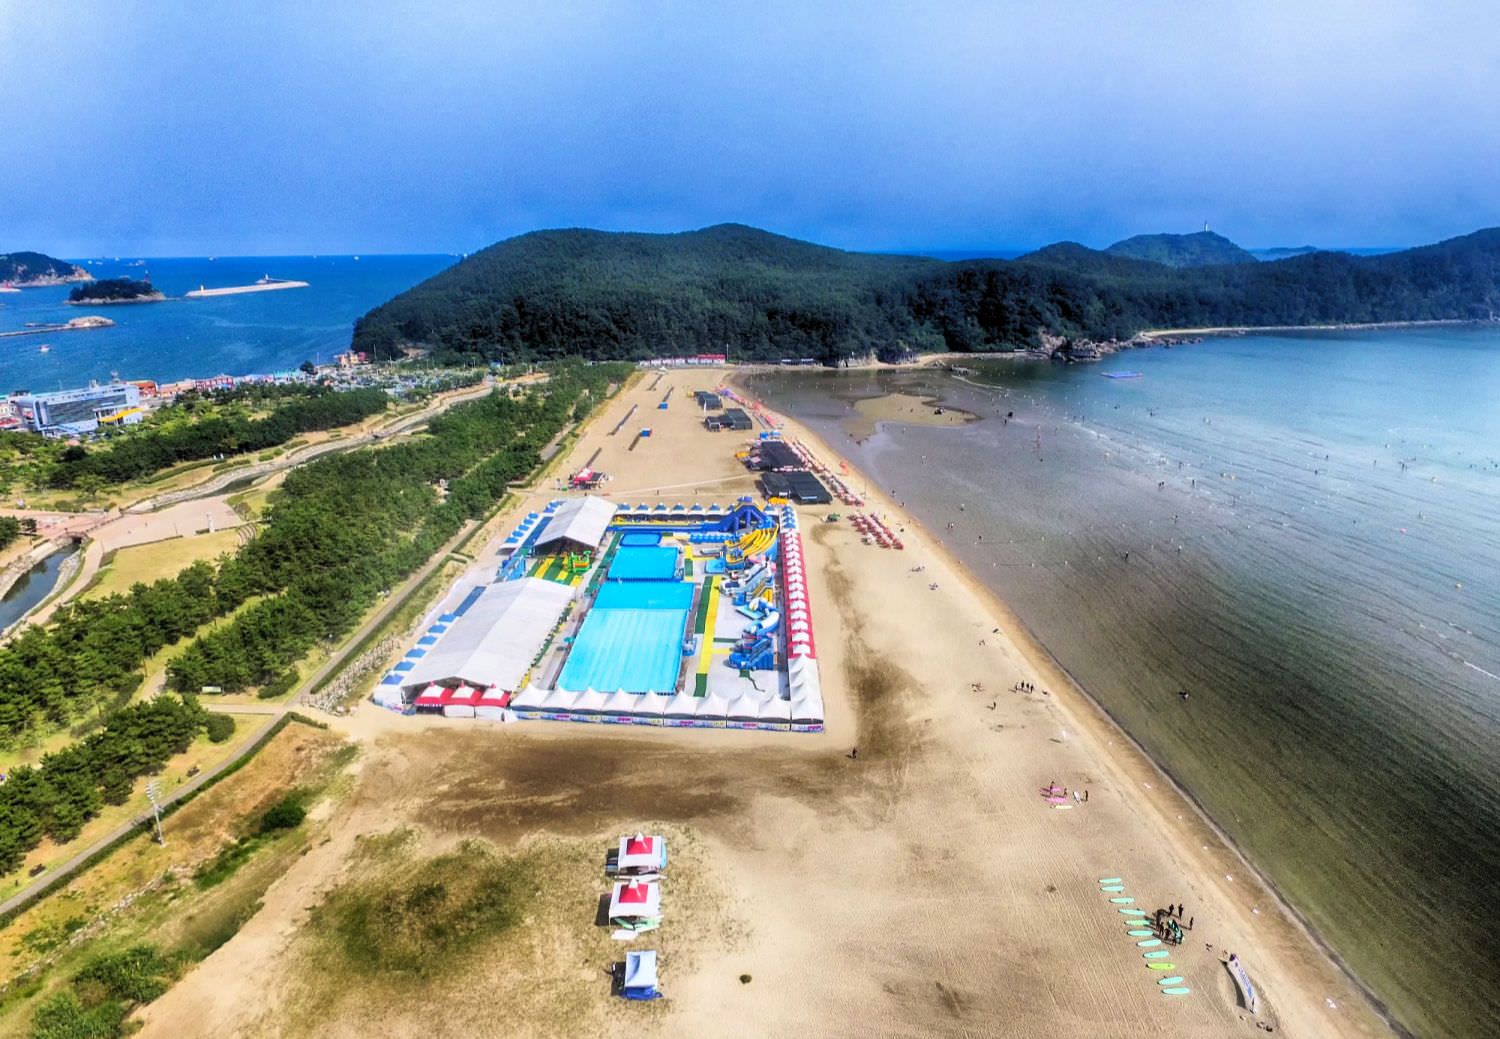 Dadaepo Beach is a beautiful beach area located around 8 kilometers from Busan City's downtown center. You can watch migratory birds by the river nearby.